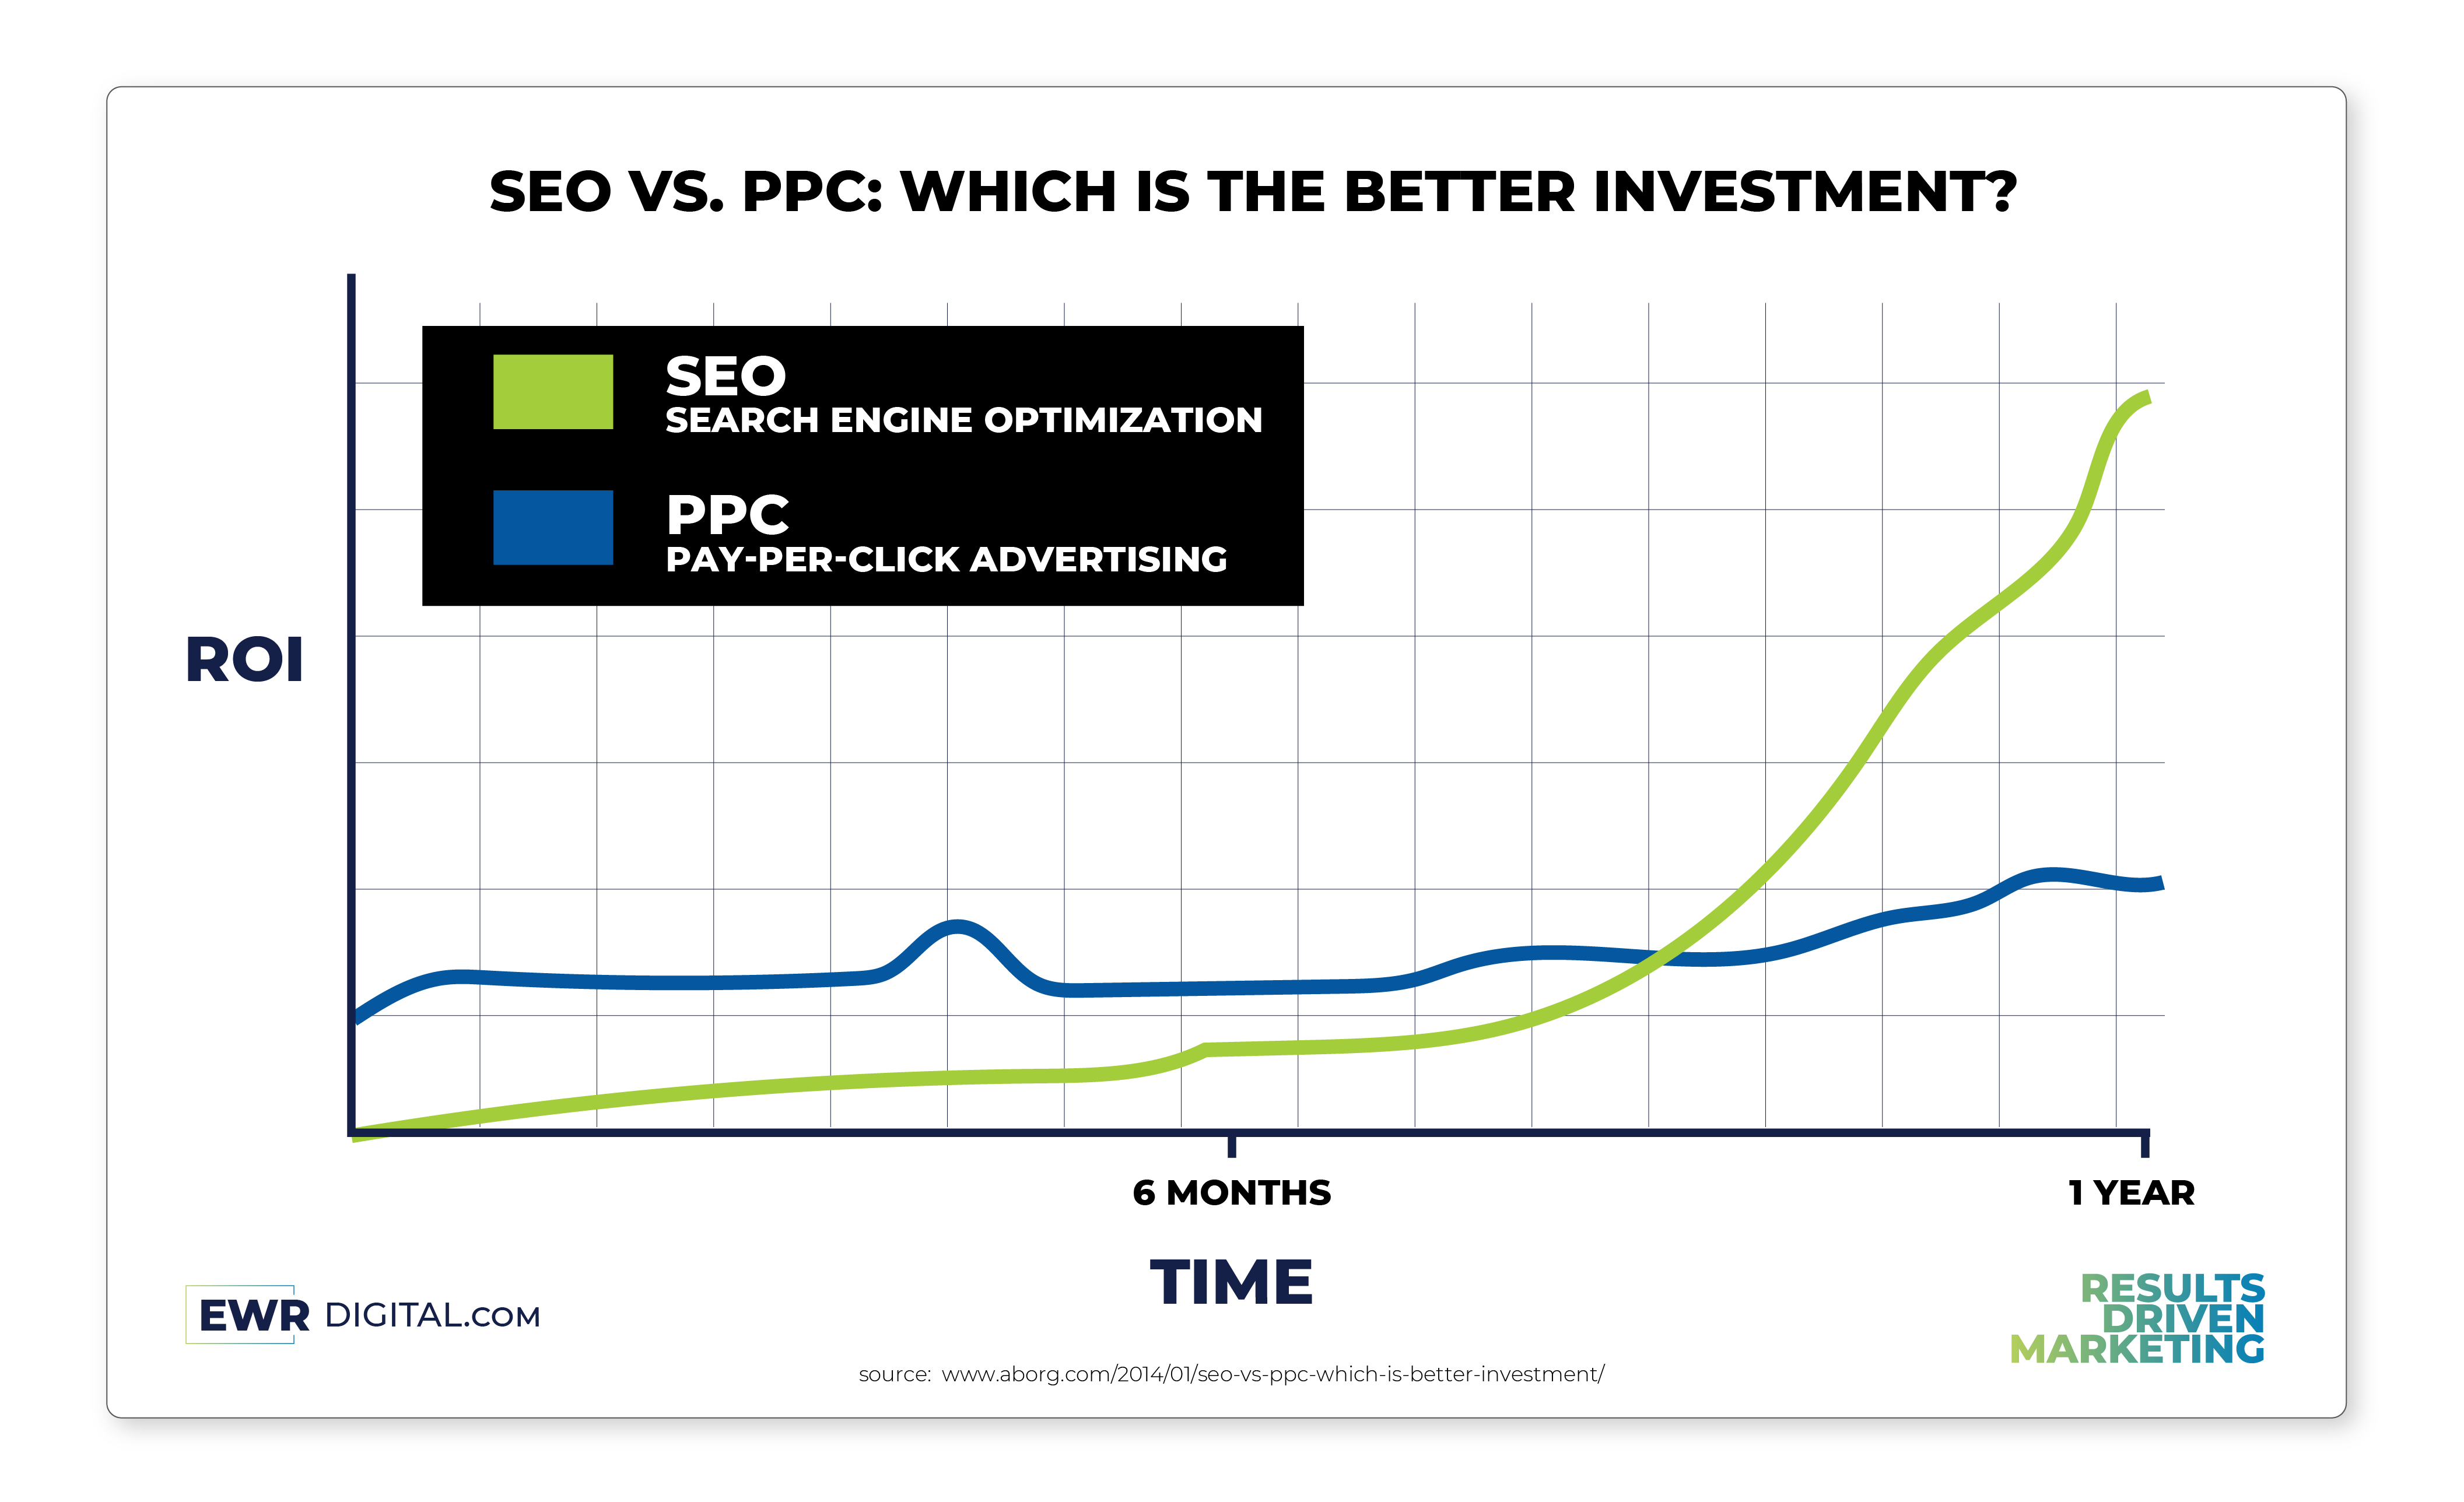 A graph comparing ROI (Return on Investment) vs. Time, illustrating the debate between SEO (Search Engine Optimization) and PPC (Pay-Per-Click) as investment options.